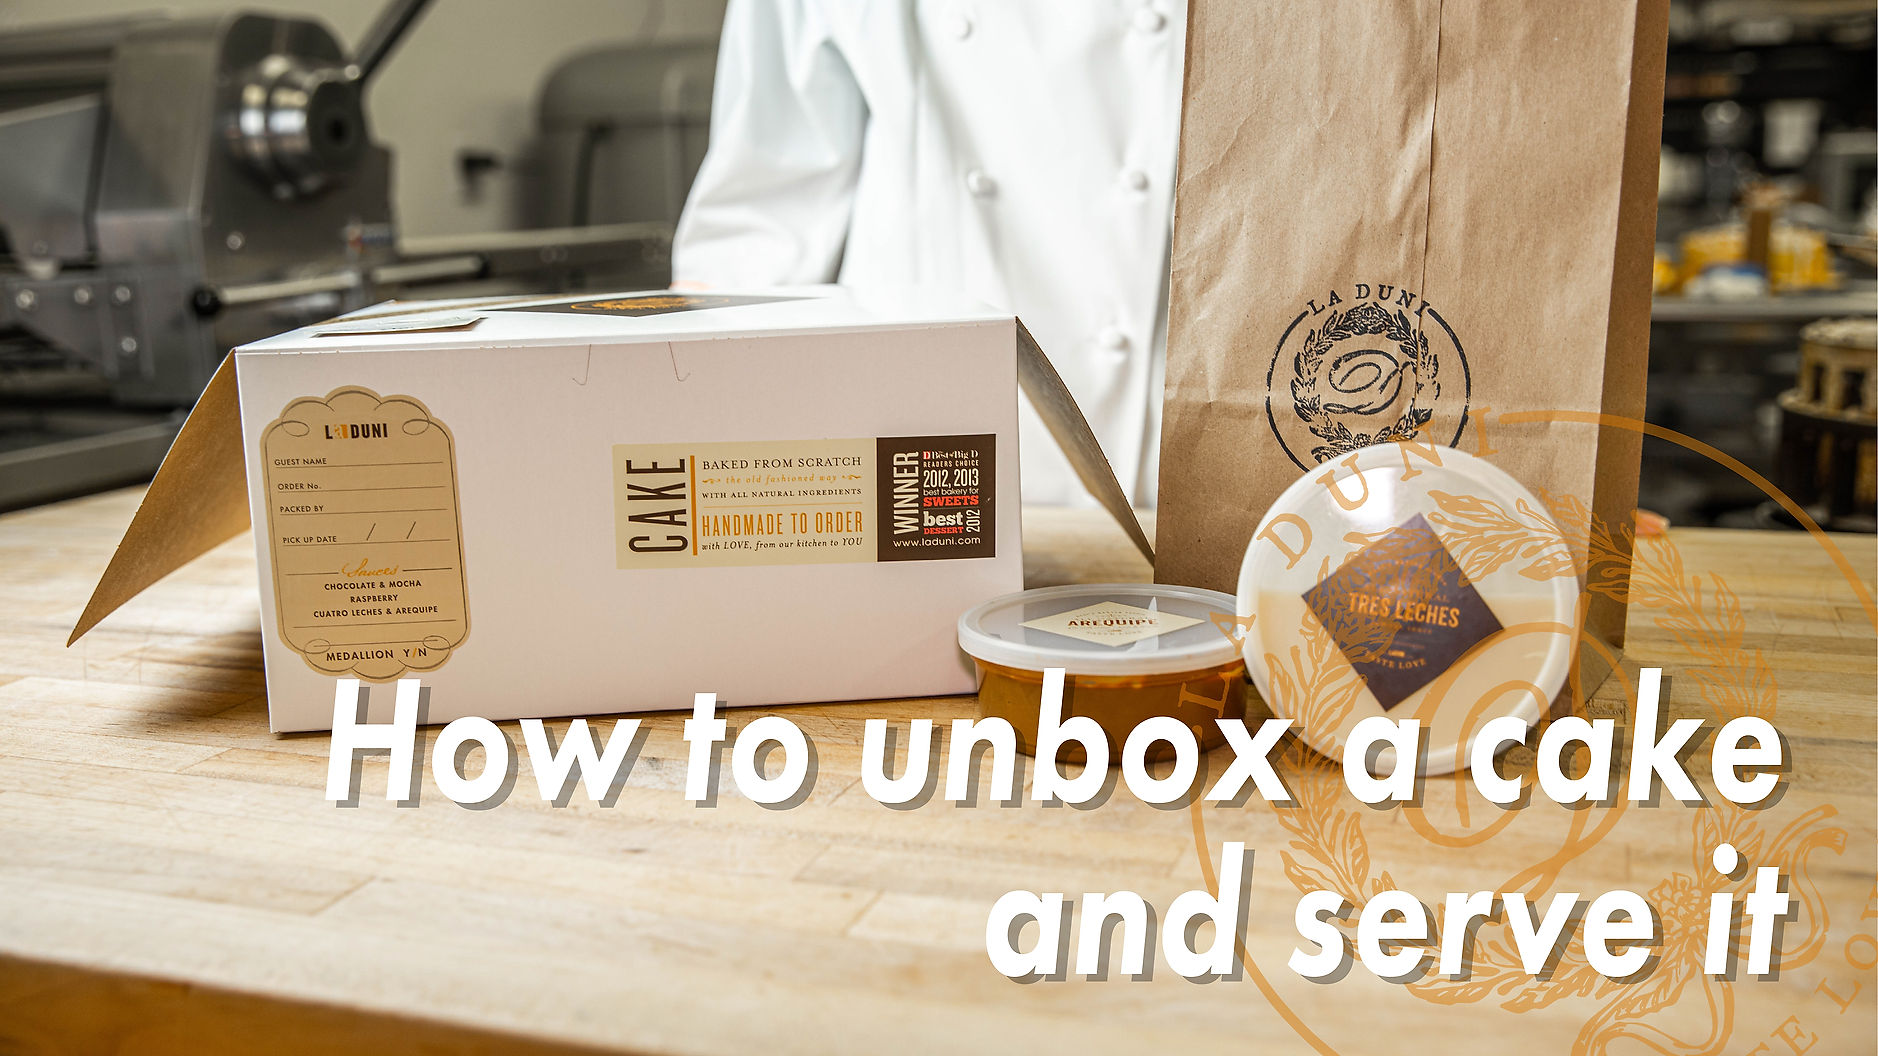 How to unbox a cake & serve it